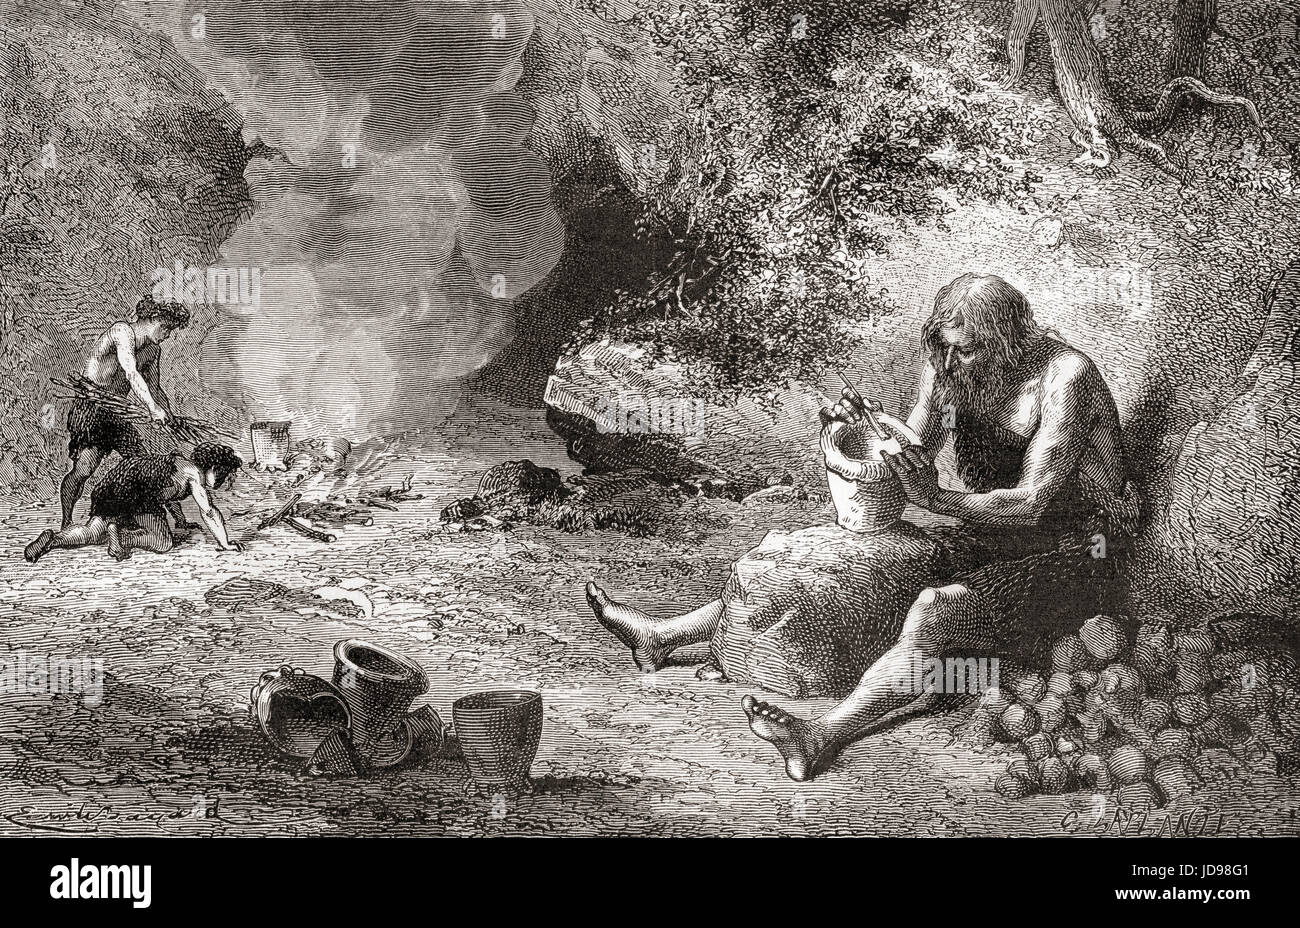 A potter at work during the Neolithic Age, New Stone Age or Age of the Polished Stone. From L'Homme Primitif, published 1870. Stock Photo